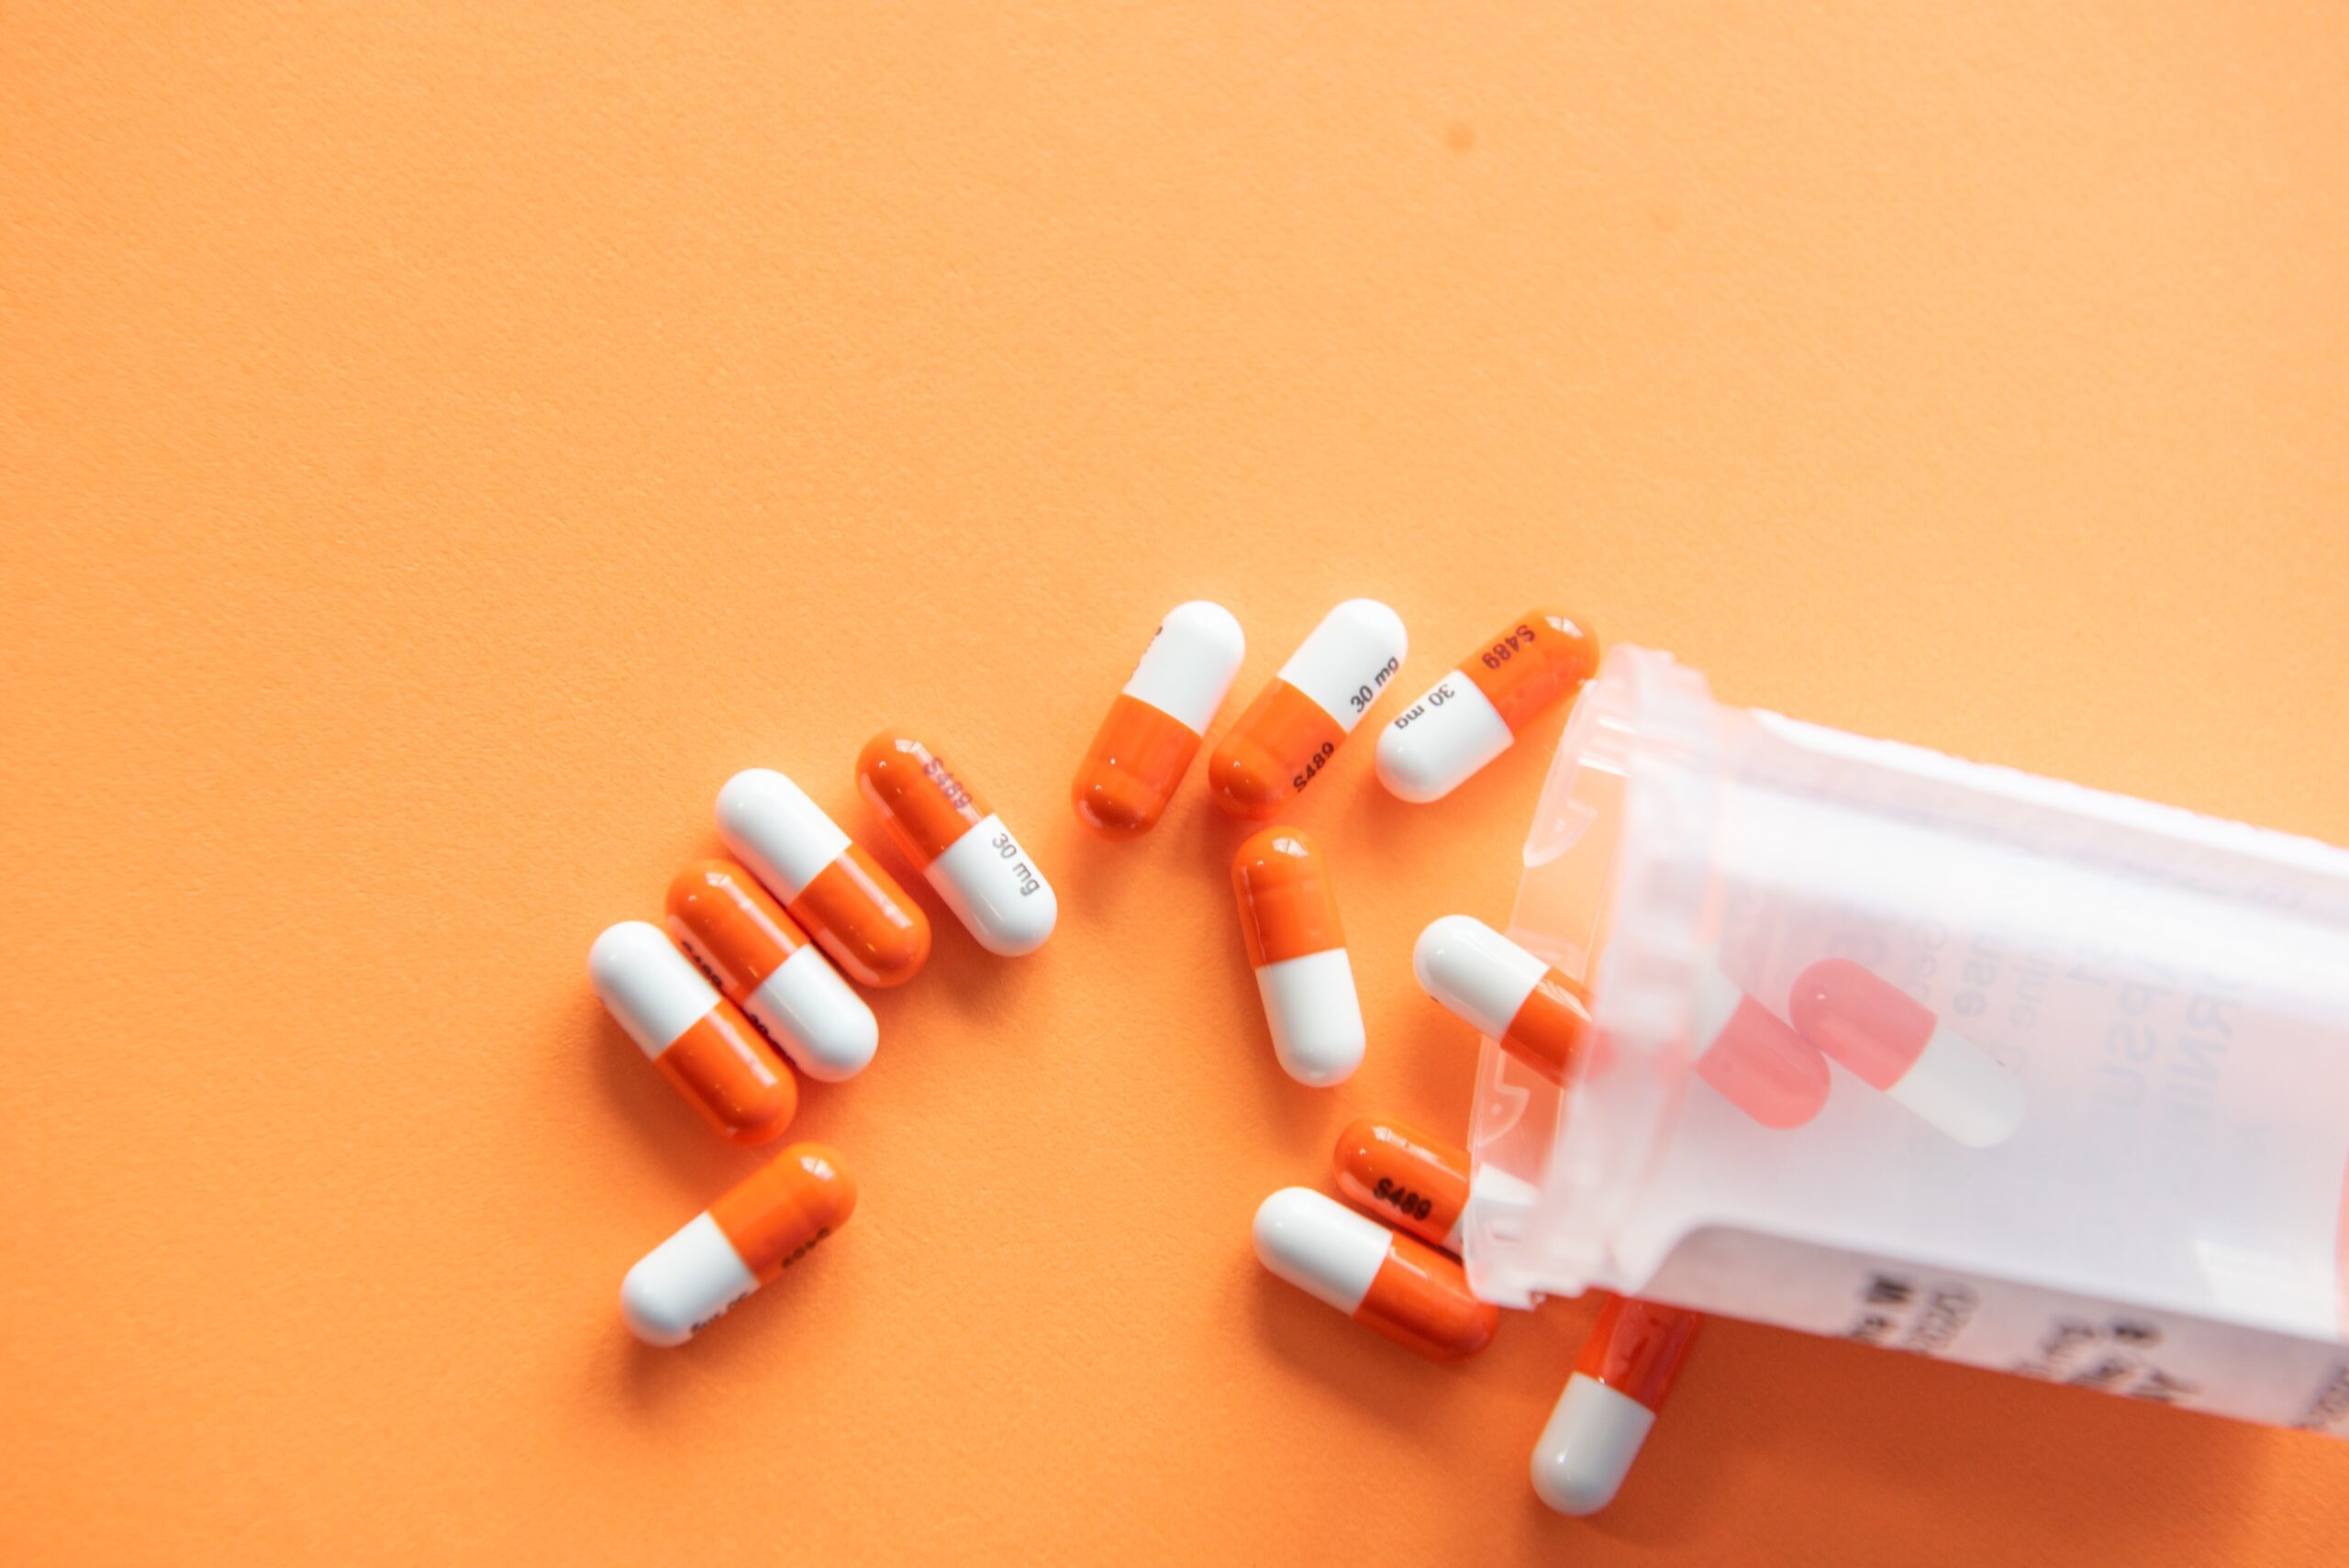 A bottle of orange & white pills spilling out of a medication container